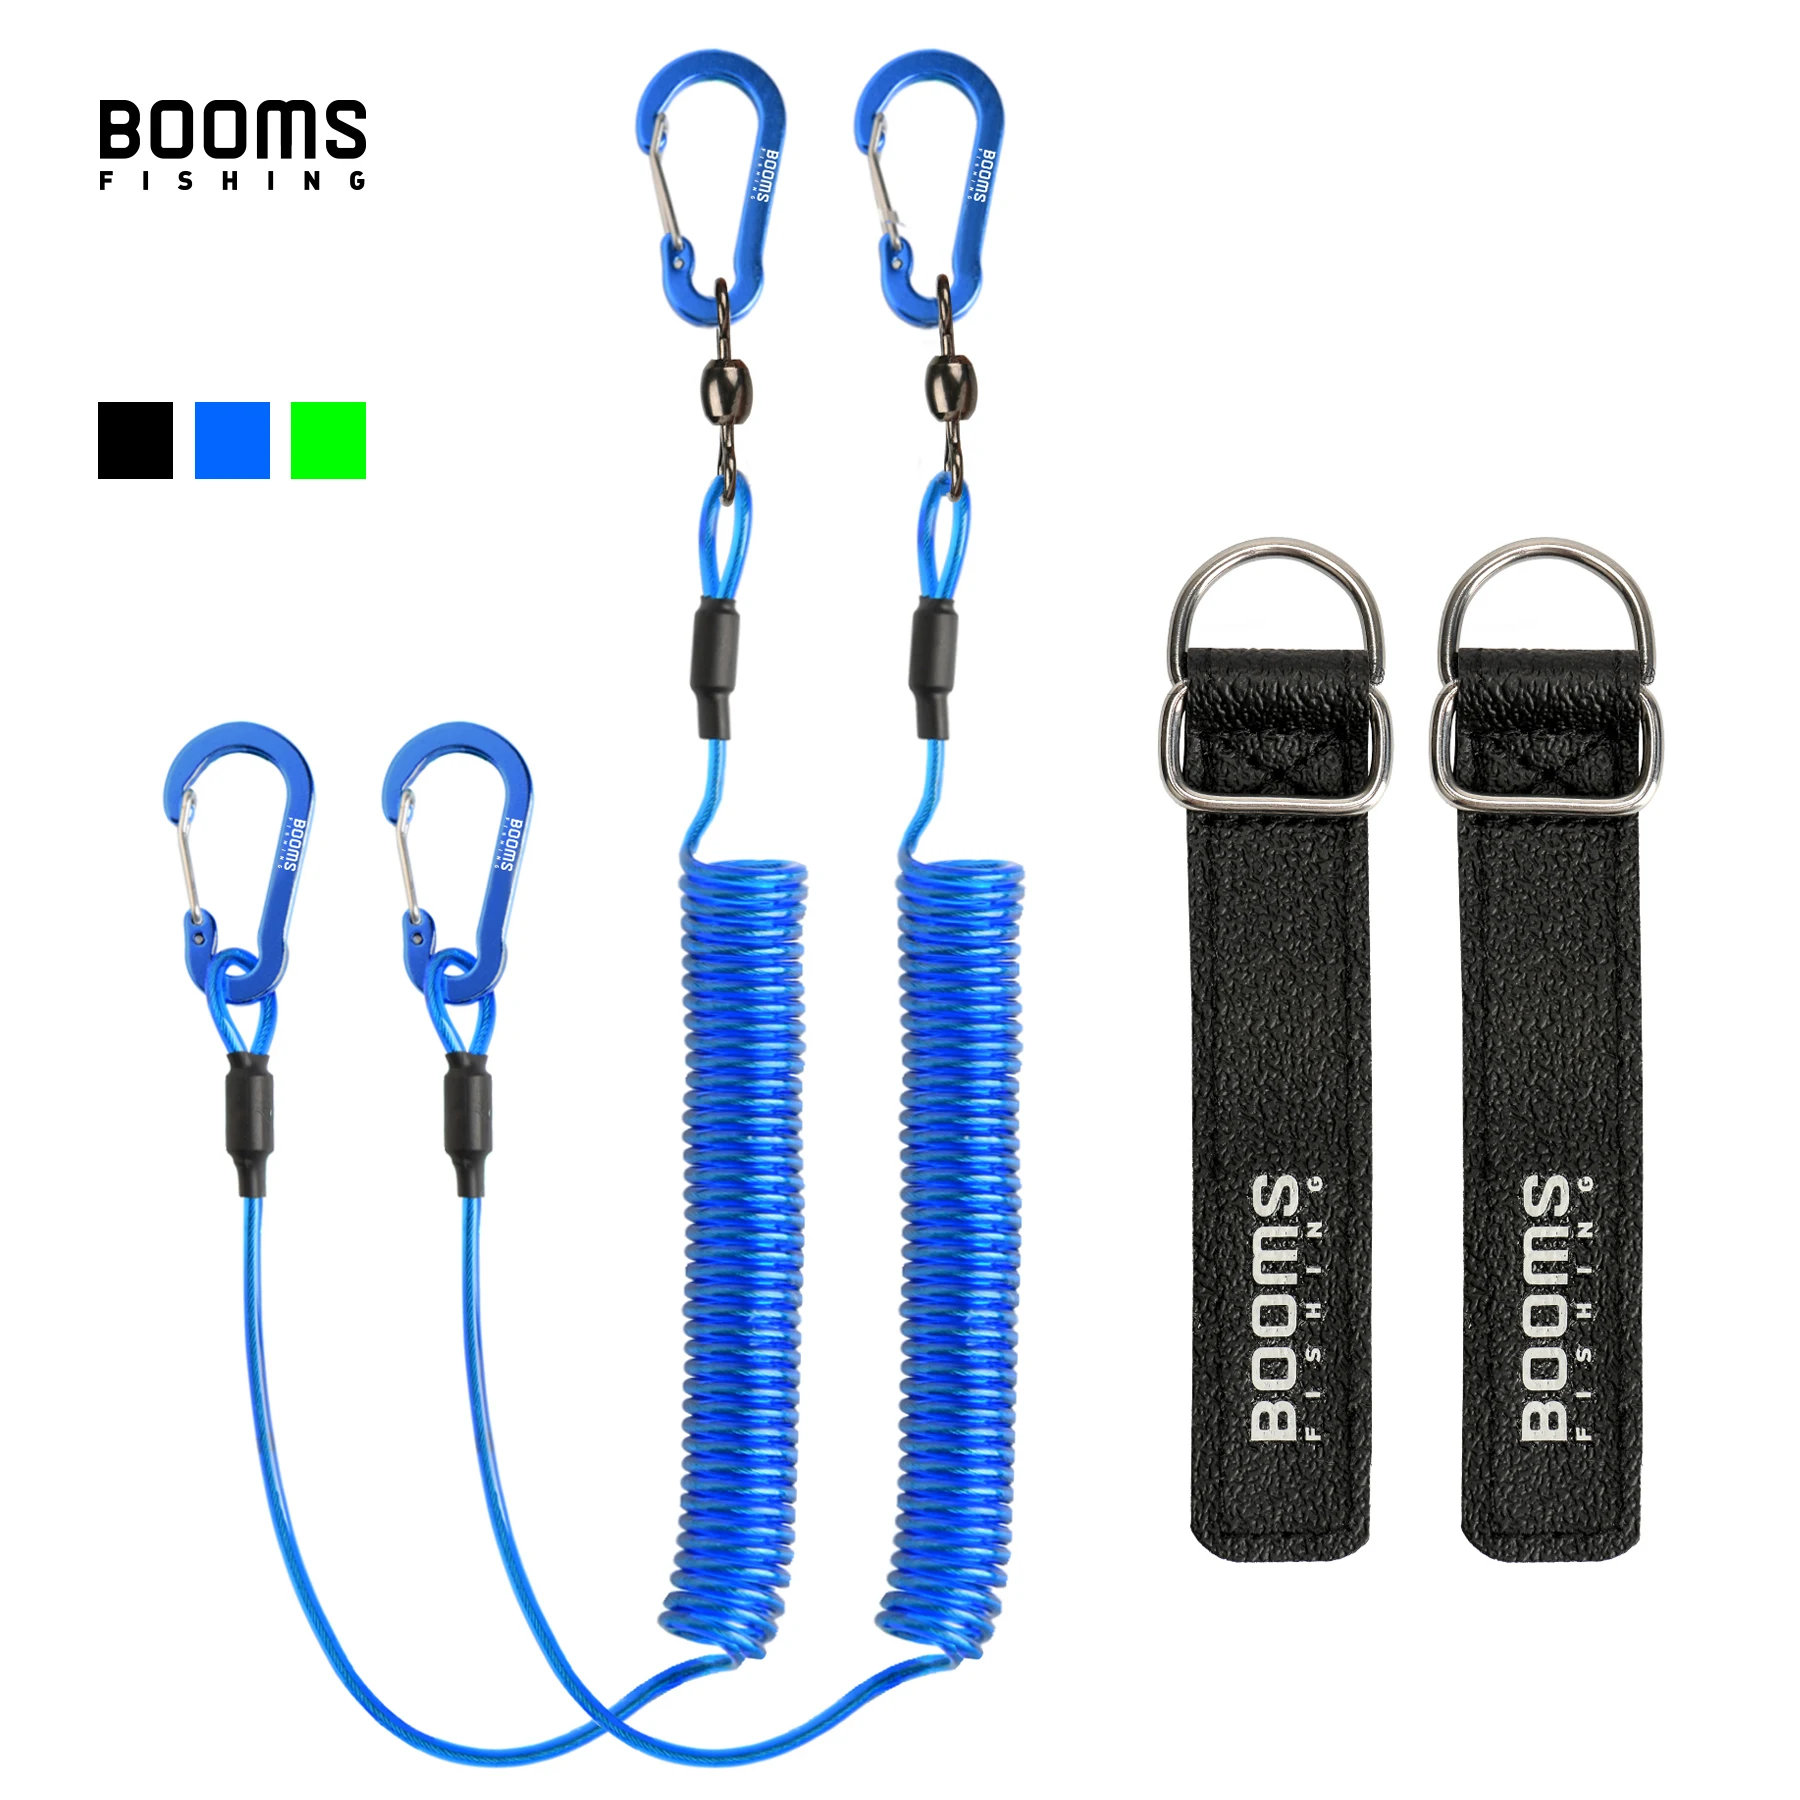 Booms Fishing T02 Heavy Duty Fishing Lanyard for Fishing Tools/Rods/Paddles 